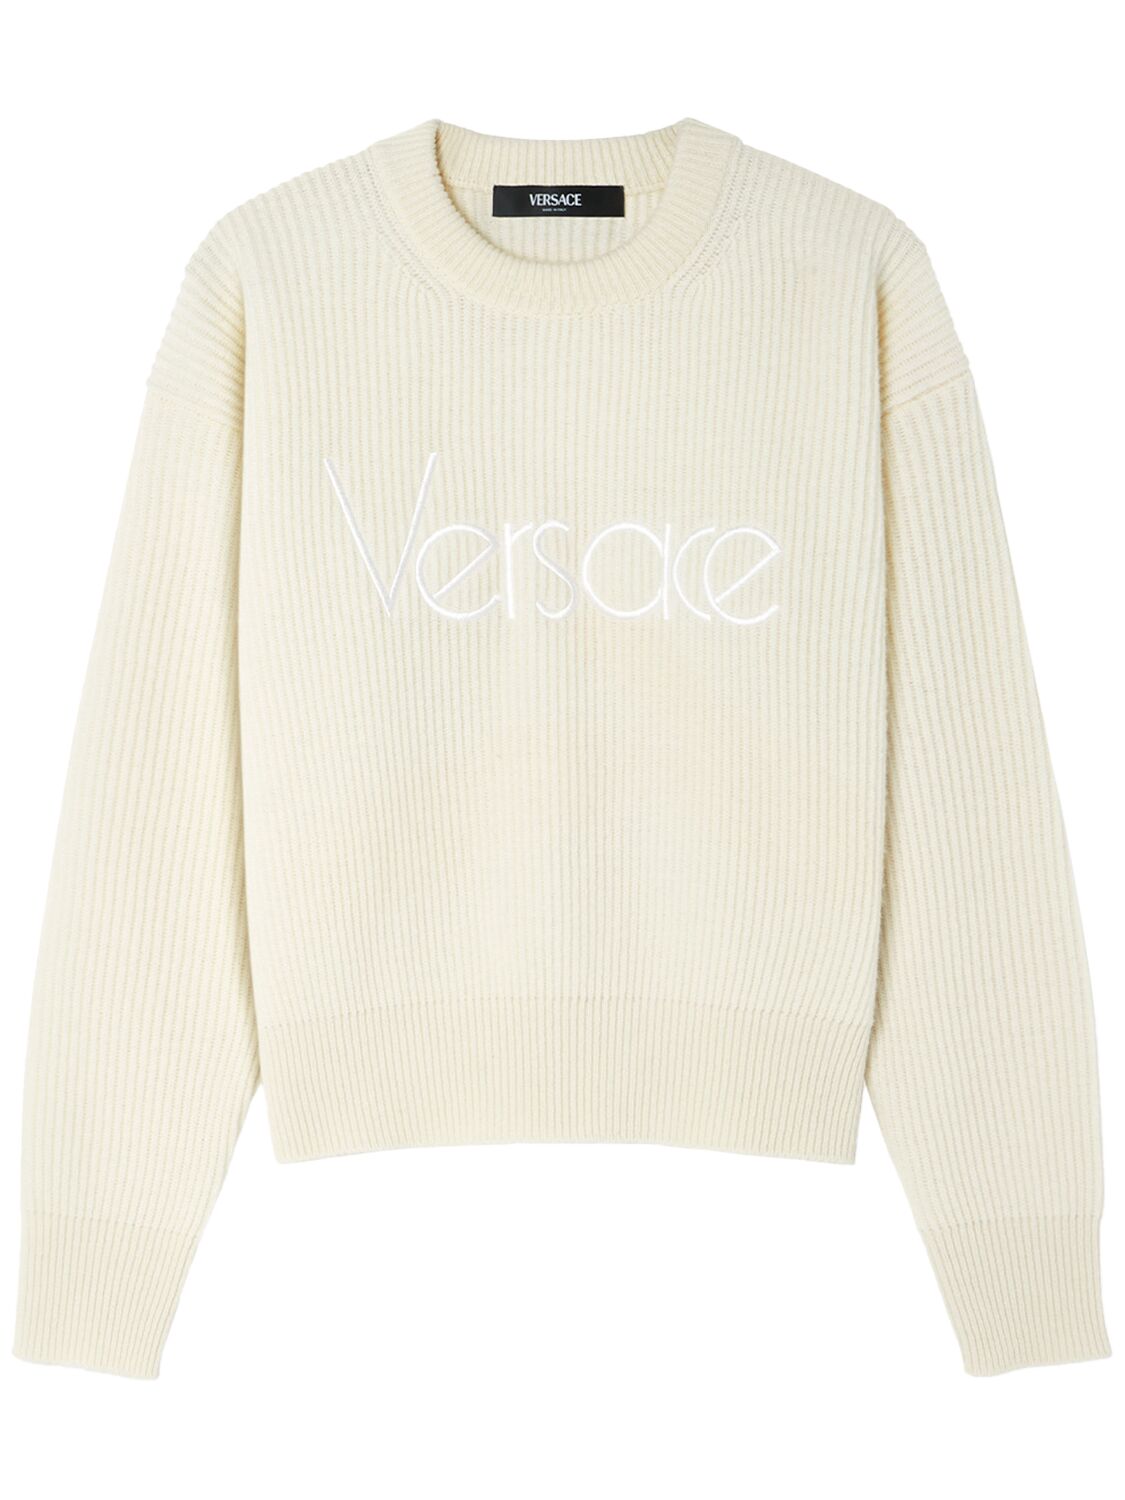 Versace Embroidered '80s Logo Rib Knit Sweater In White